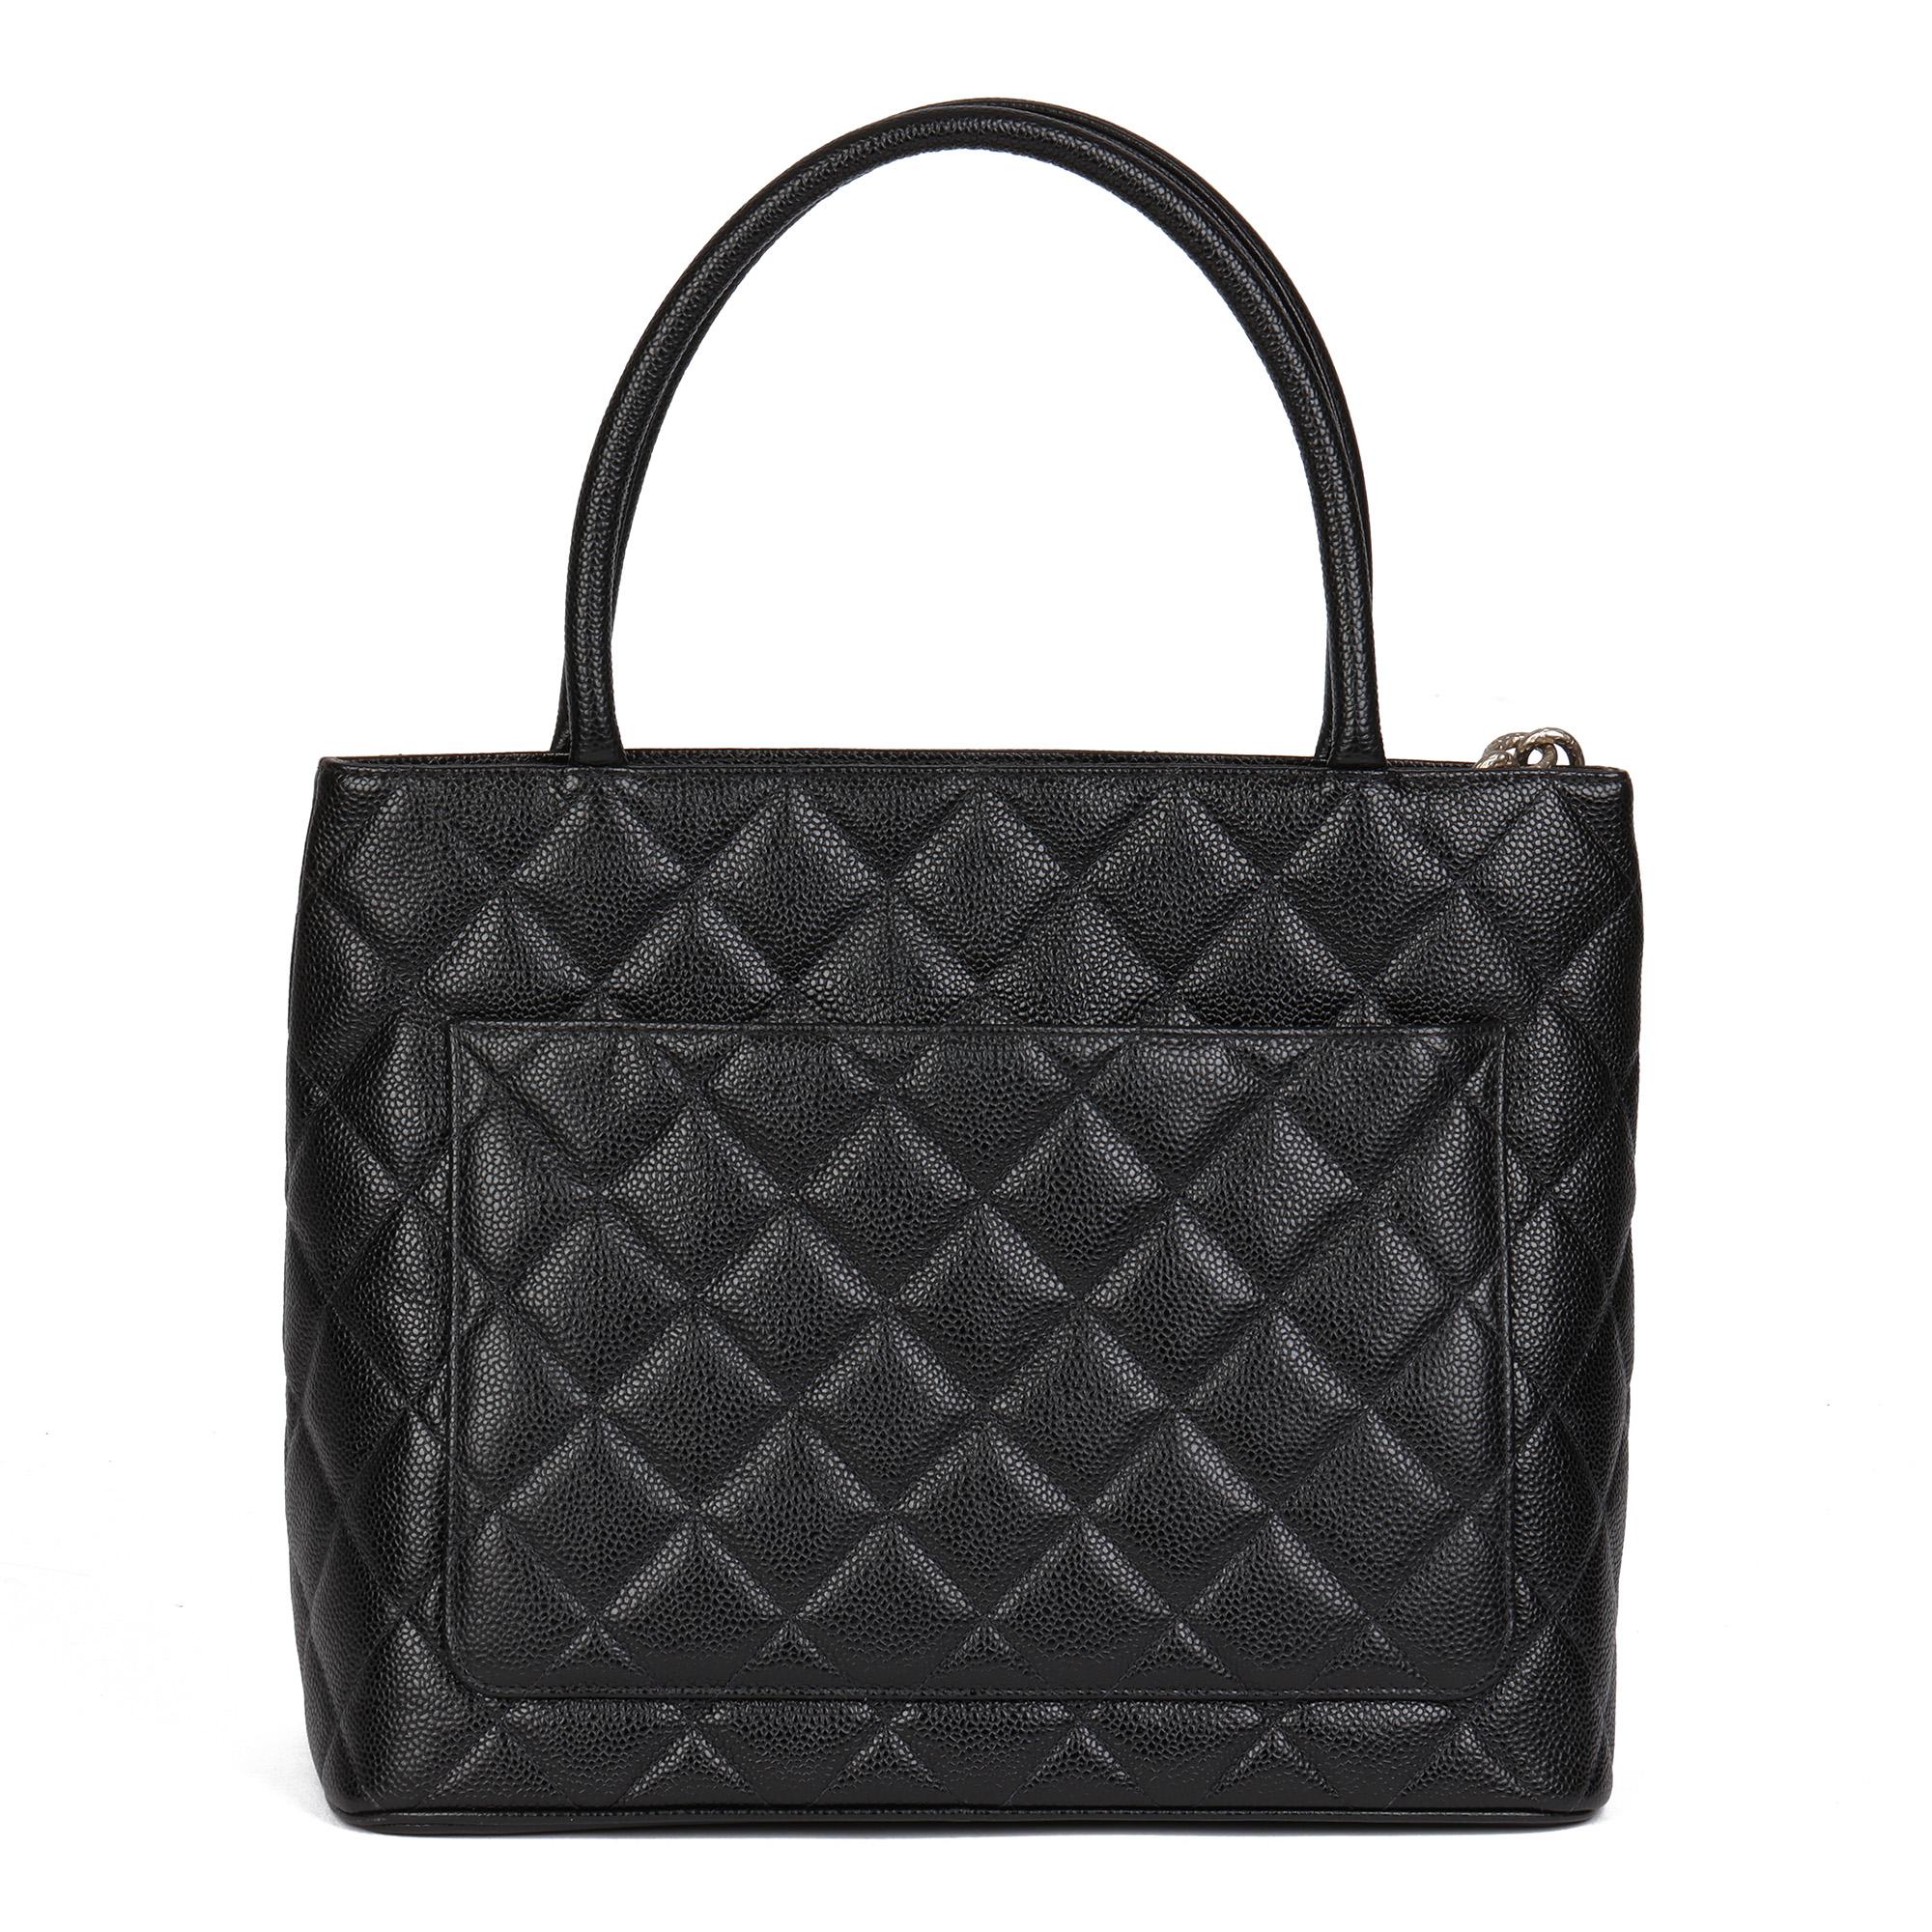 CHANEL Black Quilted Caviar Leather Vintage Medallion Tote 1